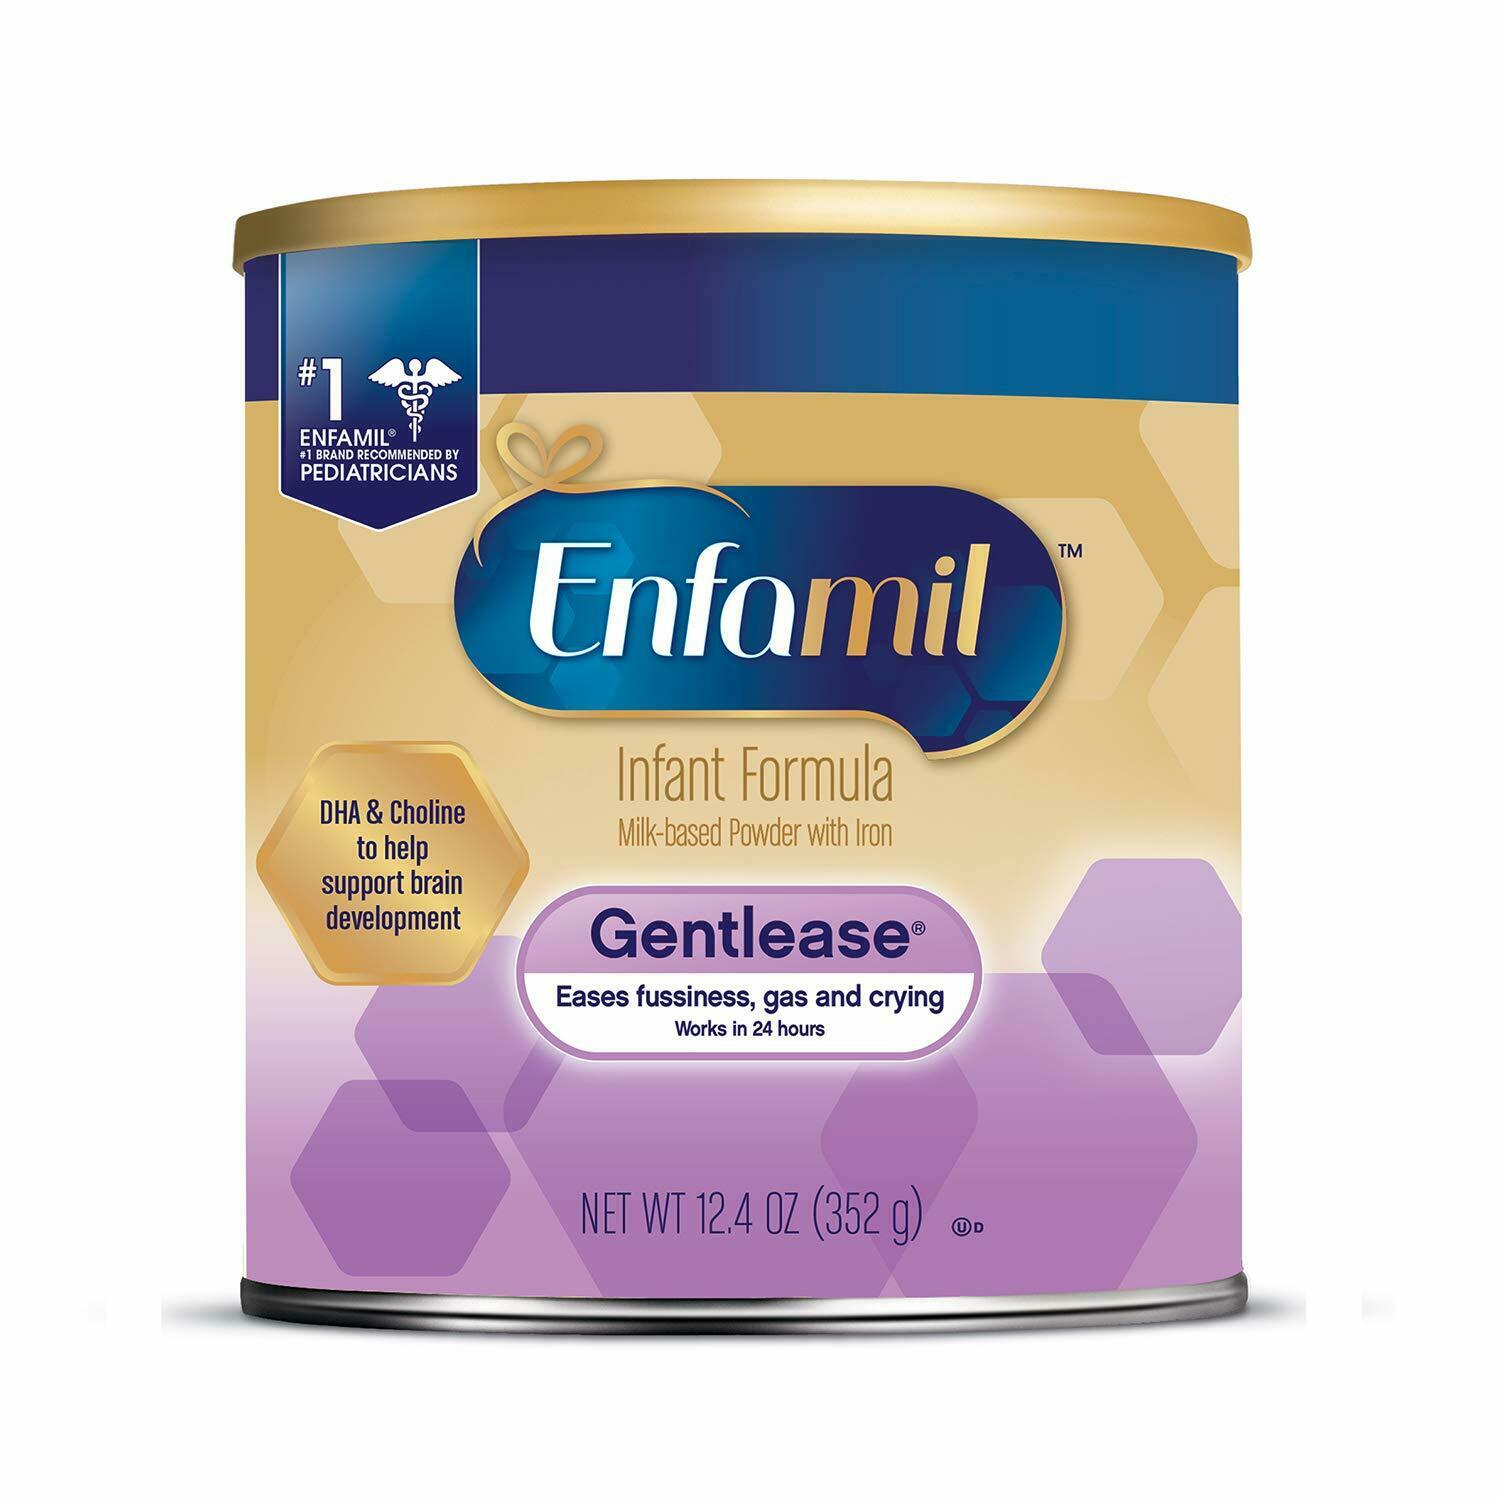 Enfamil Gentlease Infant Formula for Fussiness, Gas, and Crying - Powder